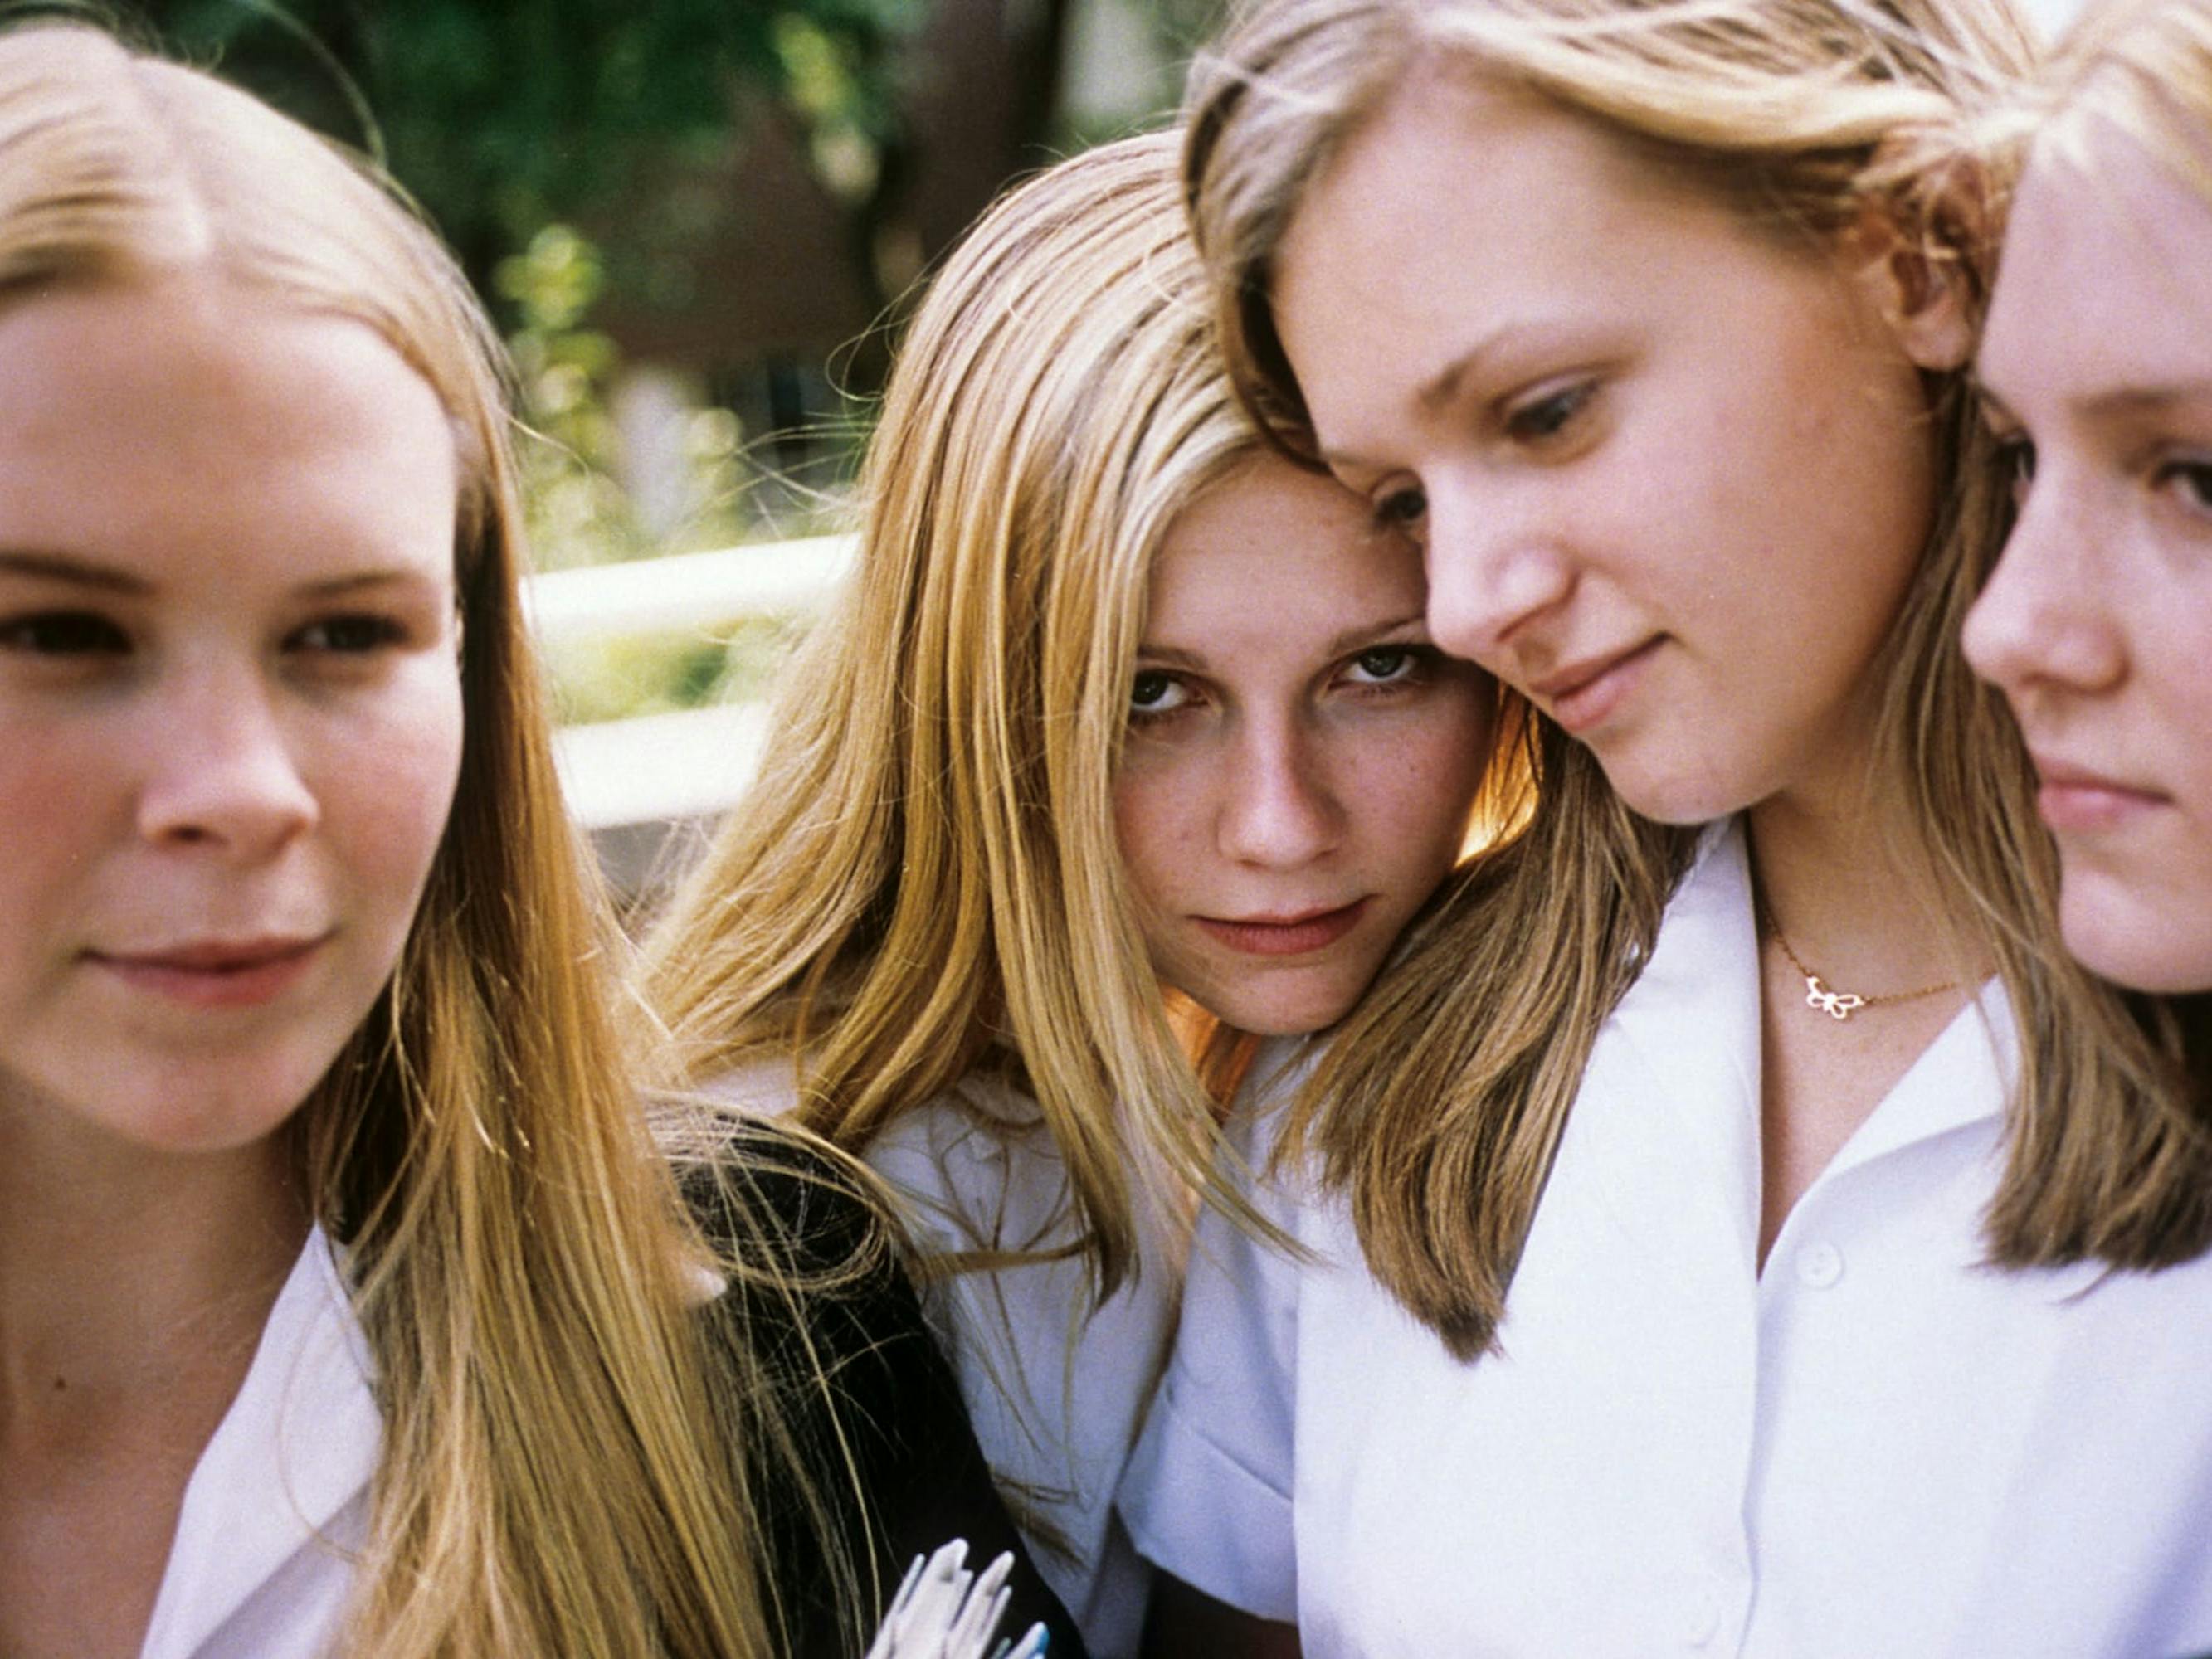 Therese Lisbon (Leslie Hayman), Lux Lisbon (Kirsten Dunst), Mary Lisbon (A.J. Cook), and Bonnie Lisbon (Chelse Swain) stand close together wearing white shirts.